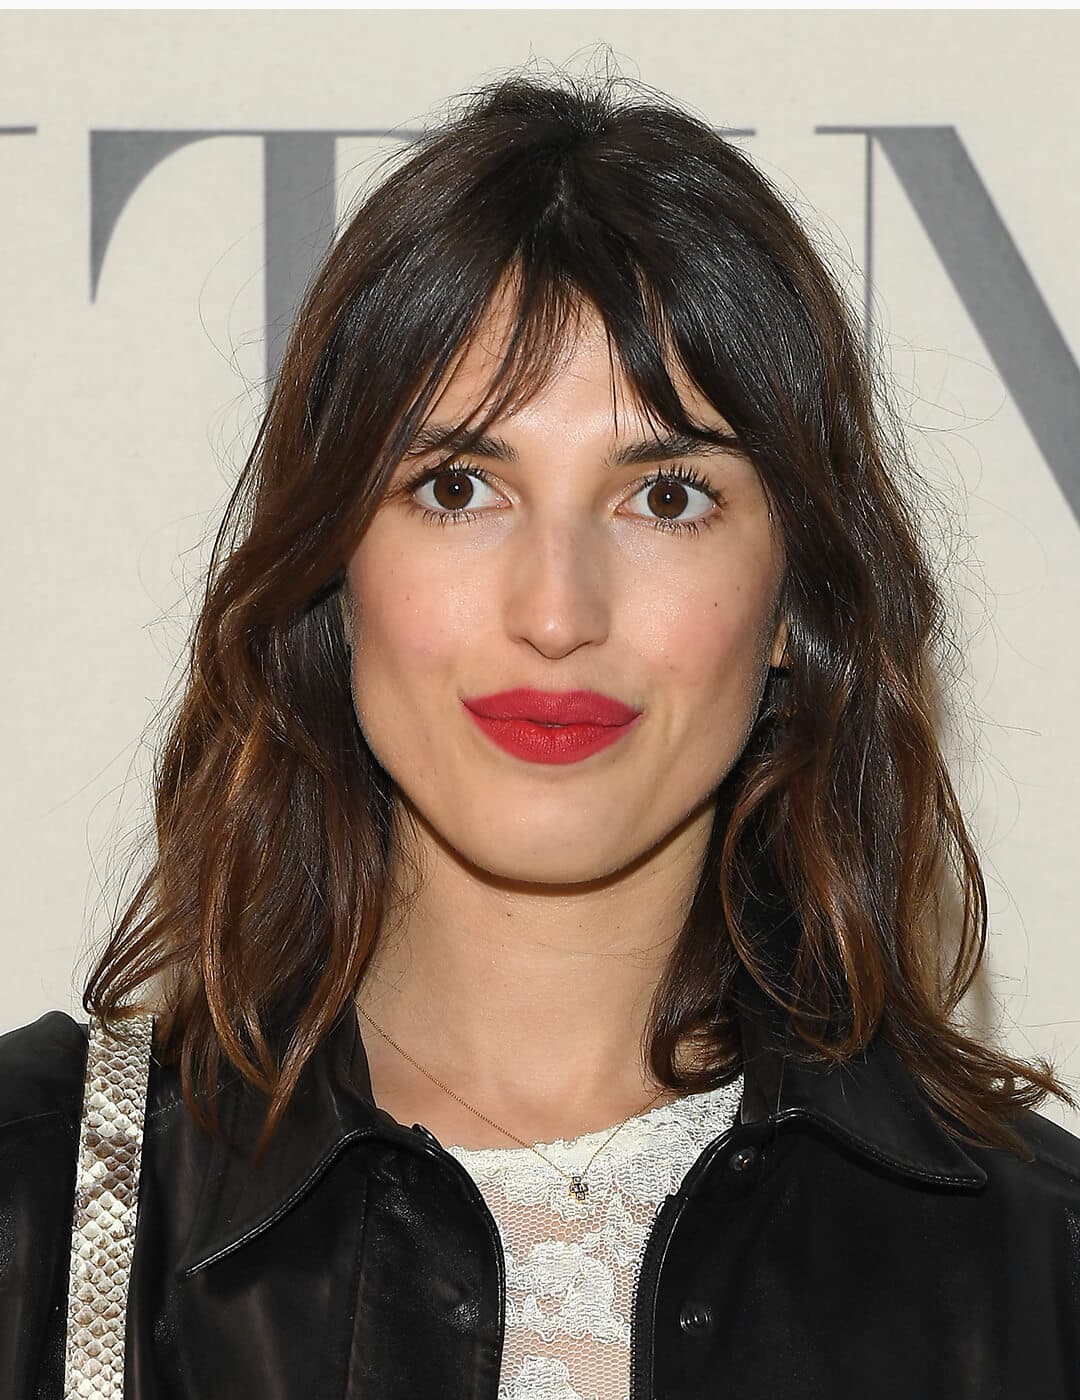 Jeanne Damas with a natural makeup look paired with red lips at the red carpet